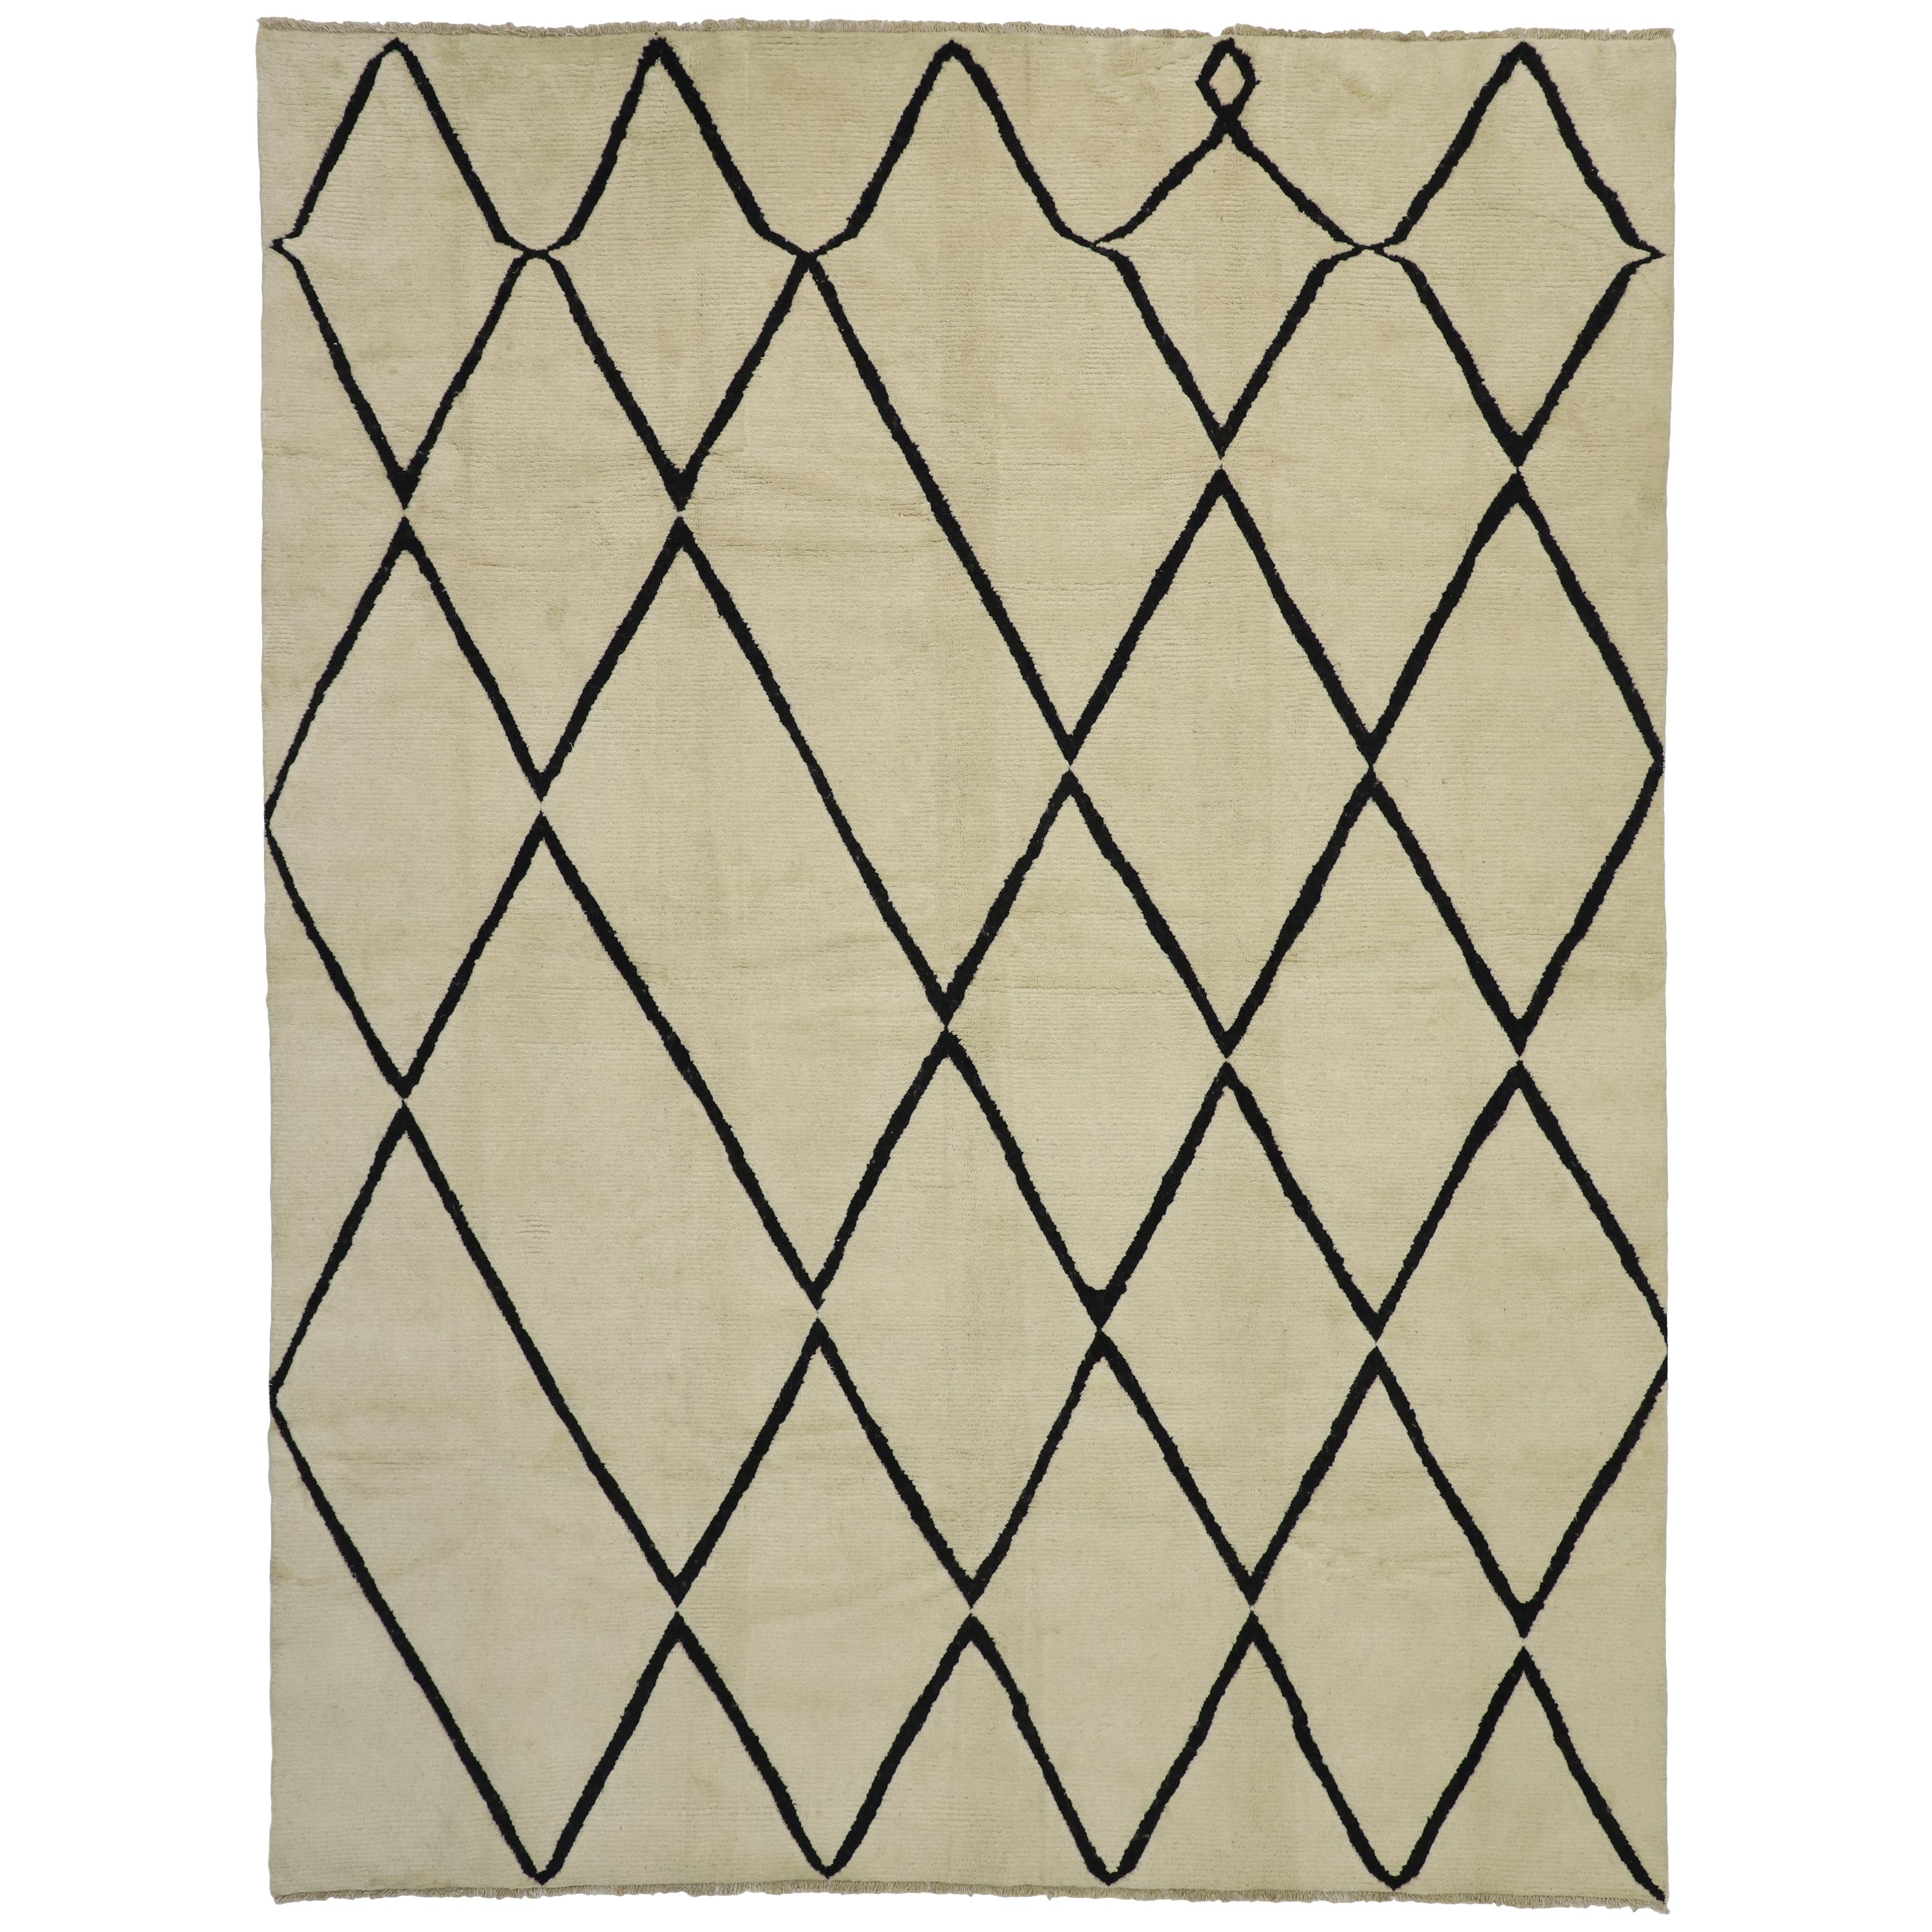 New Contemporary Moroccan Area Rug with Modernist Style